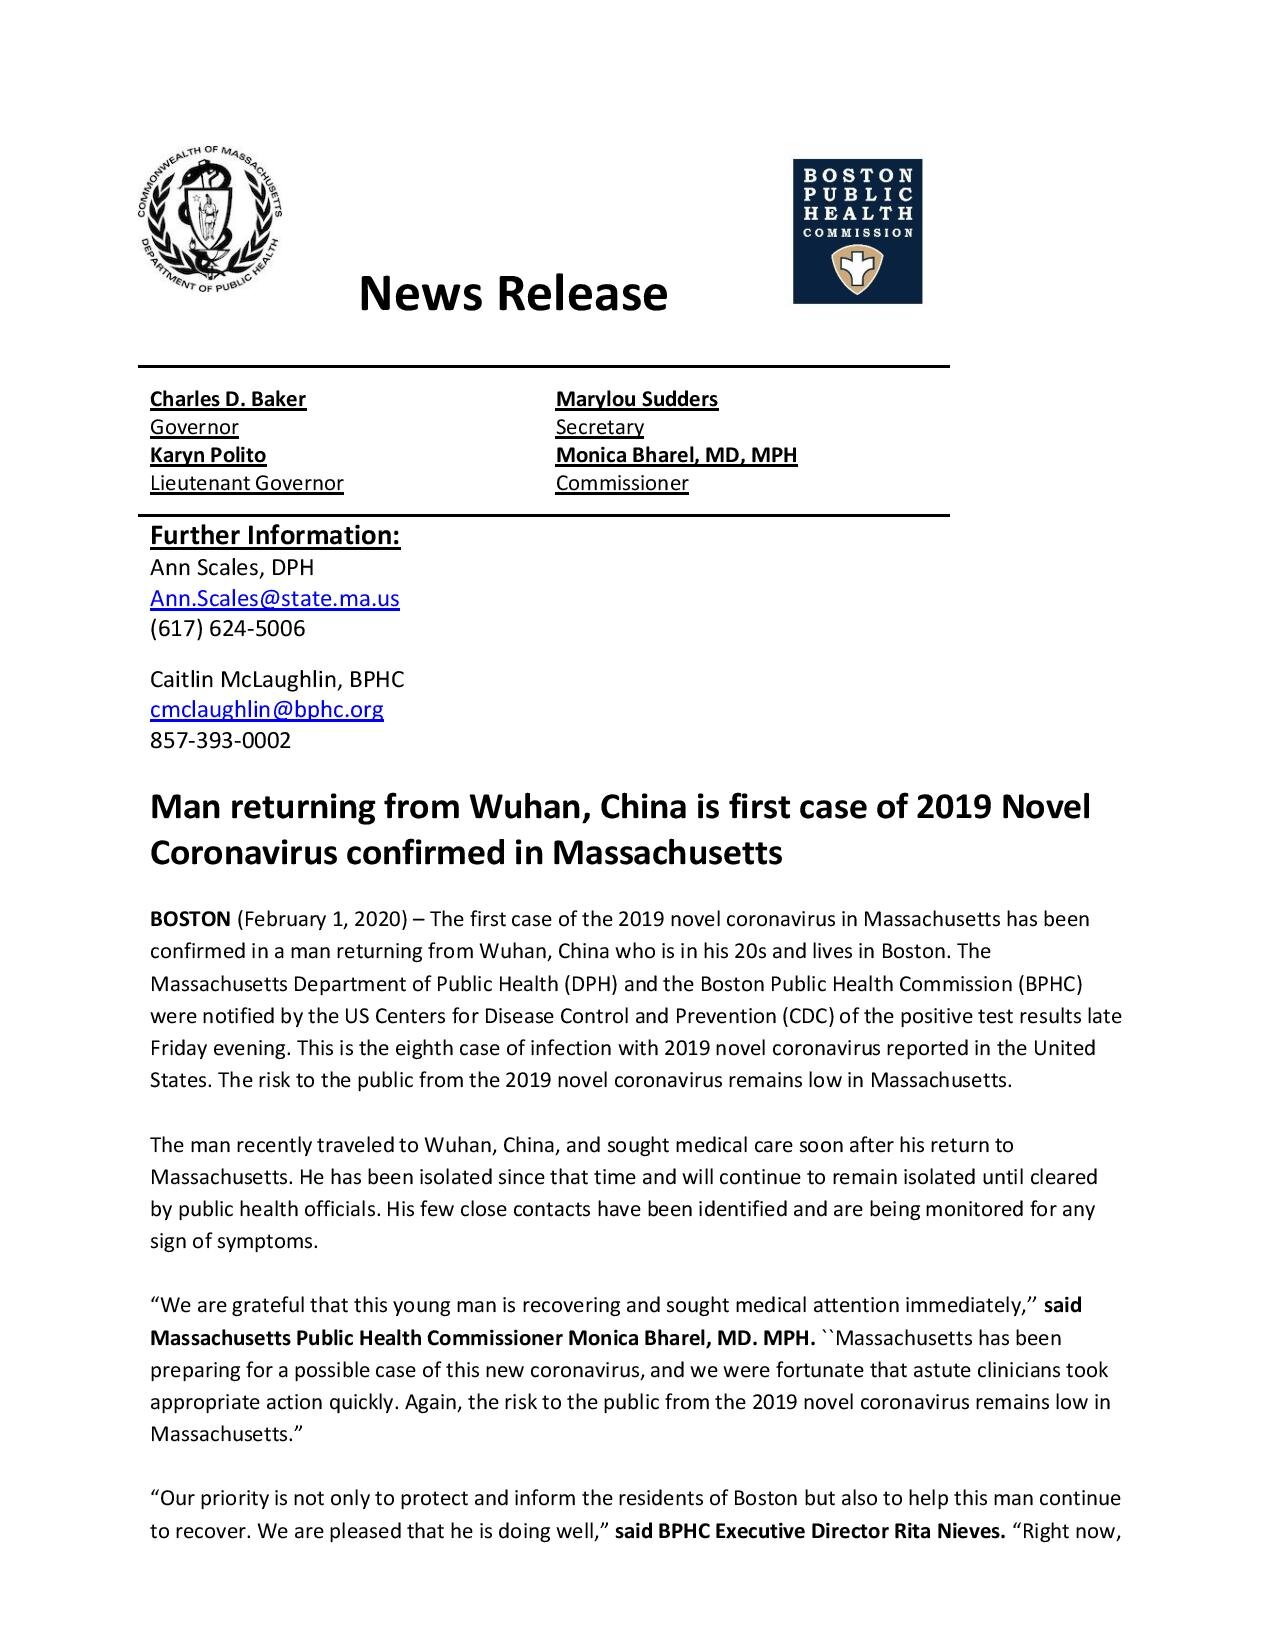 2020-02-01 Man returning from Wuhan China is first case of 2019 Novel Coronavirus confirmed in Massachusetts-page-001.jpg